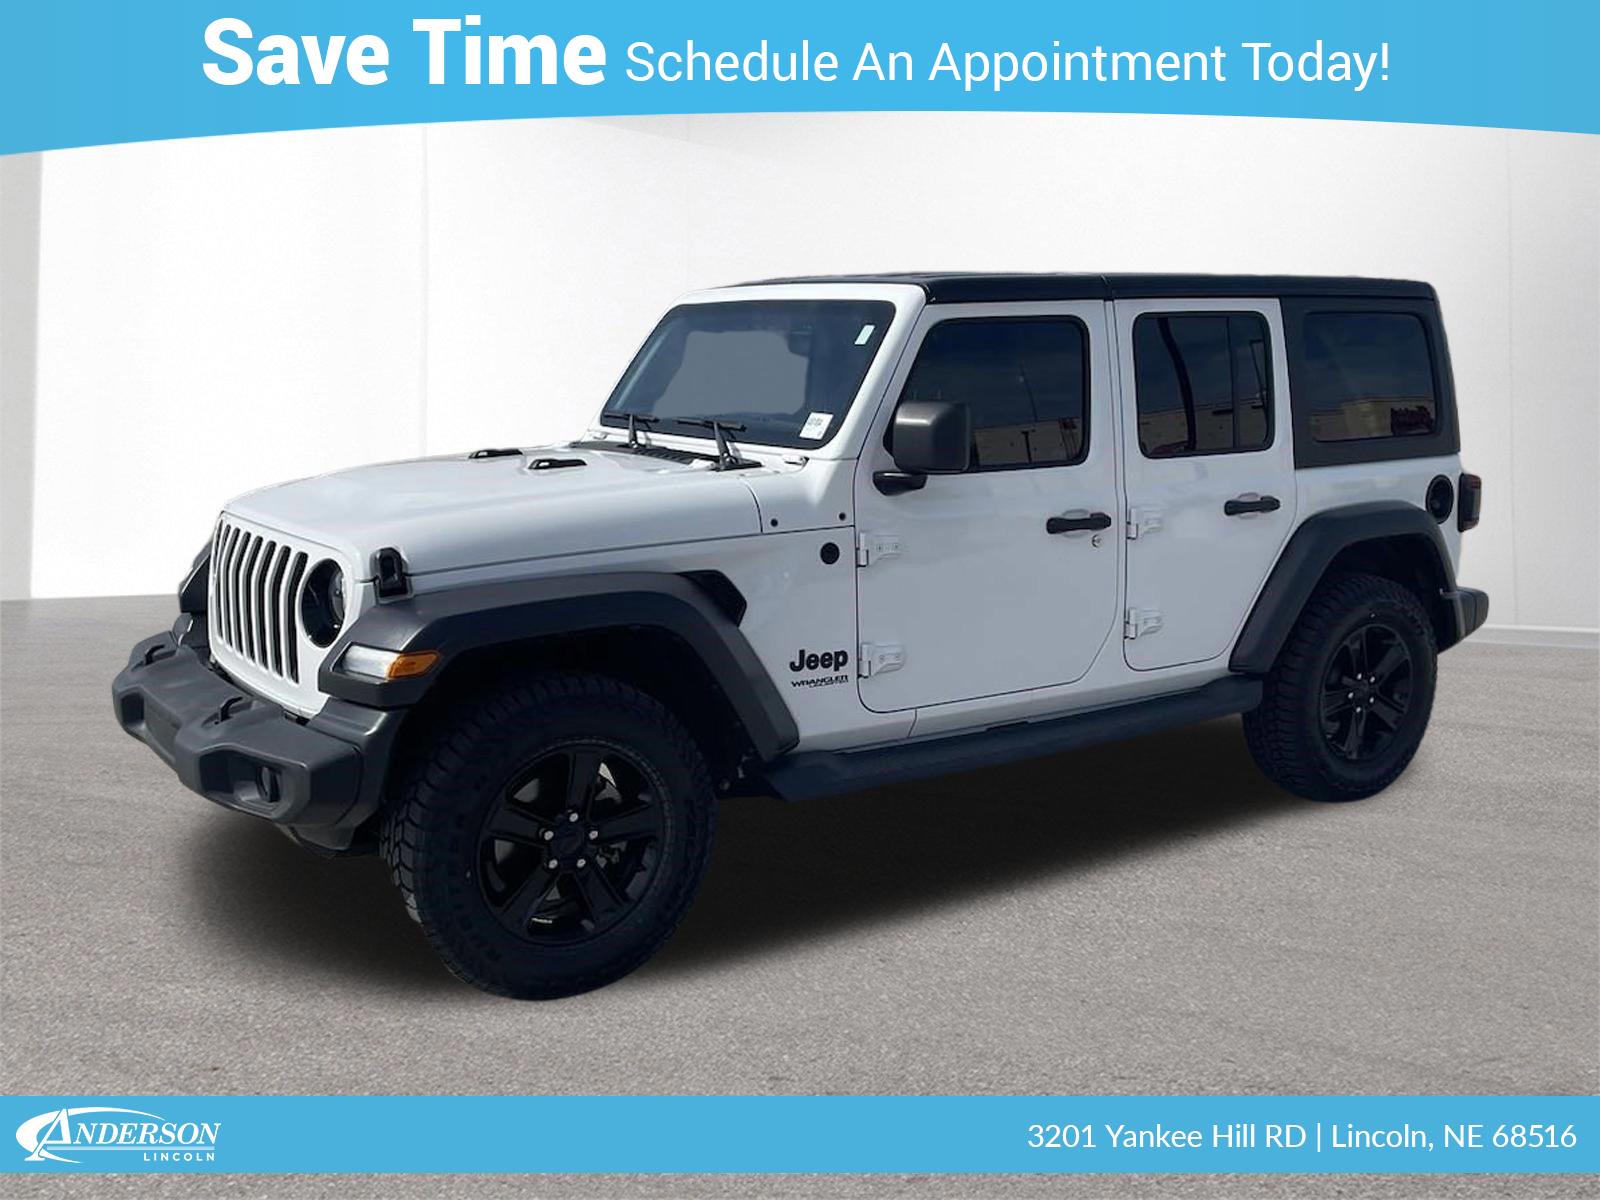 Used 2020 Jeep Wrangler Unlimited Sport Altitude Stock: 4001804